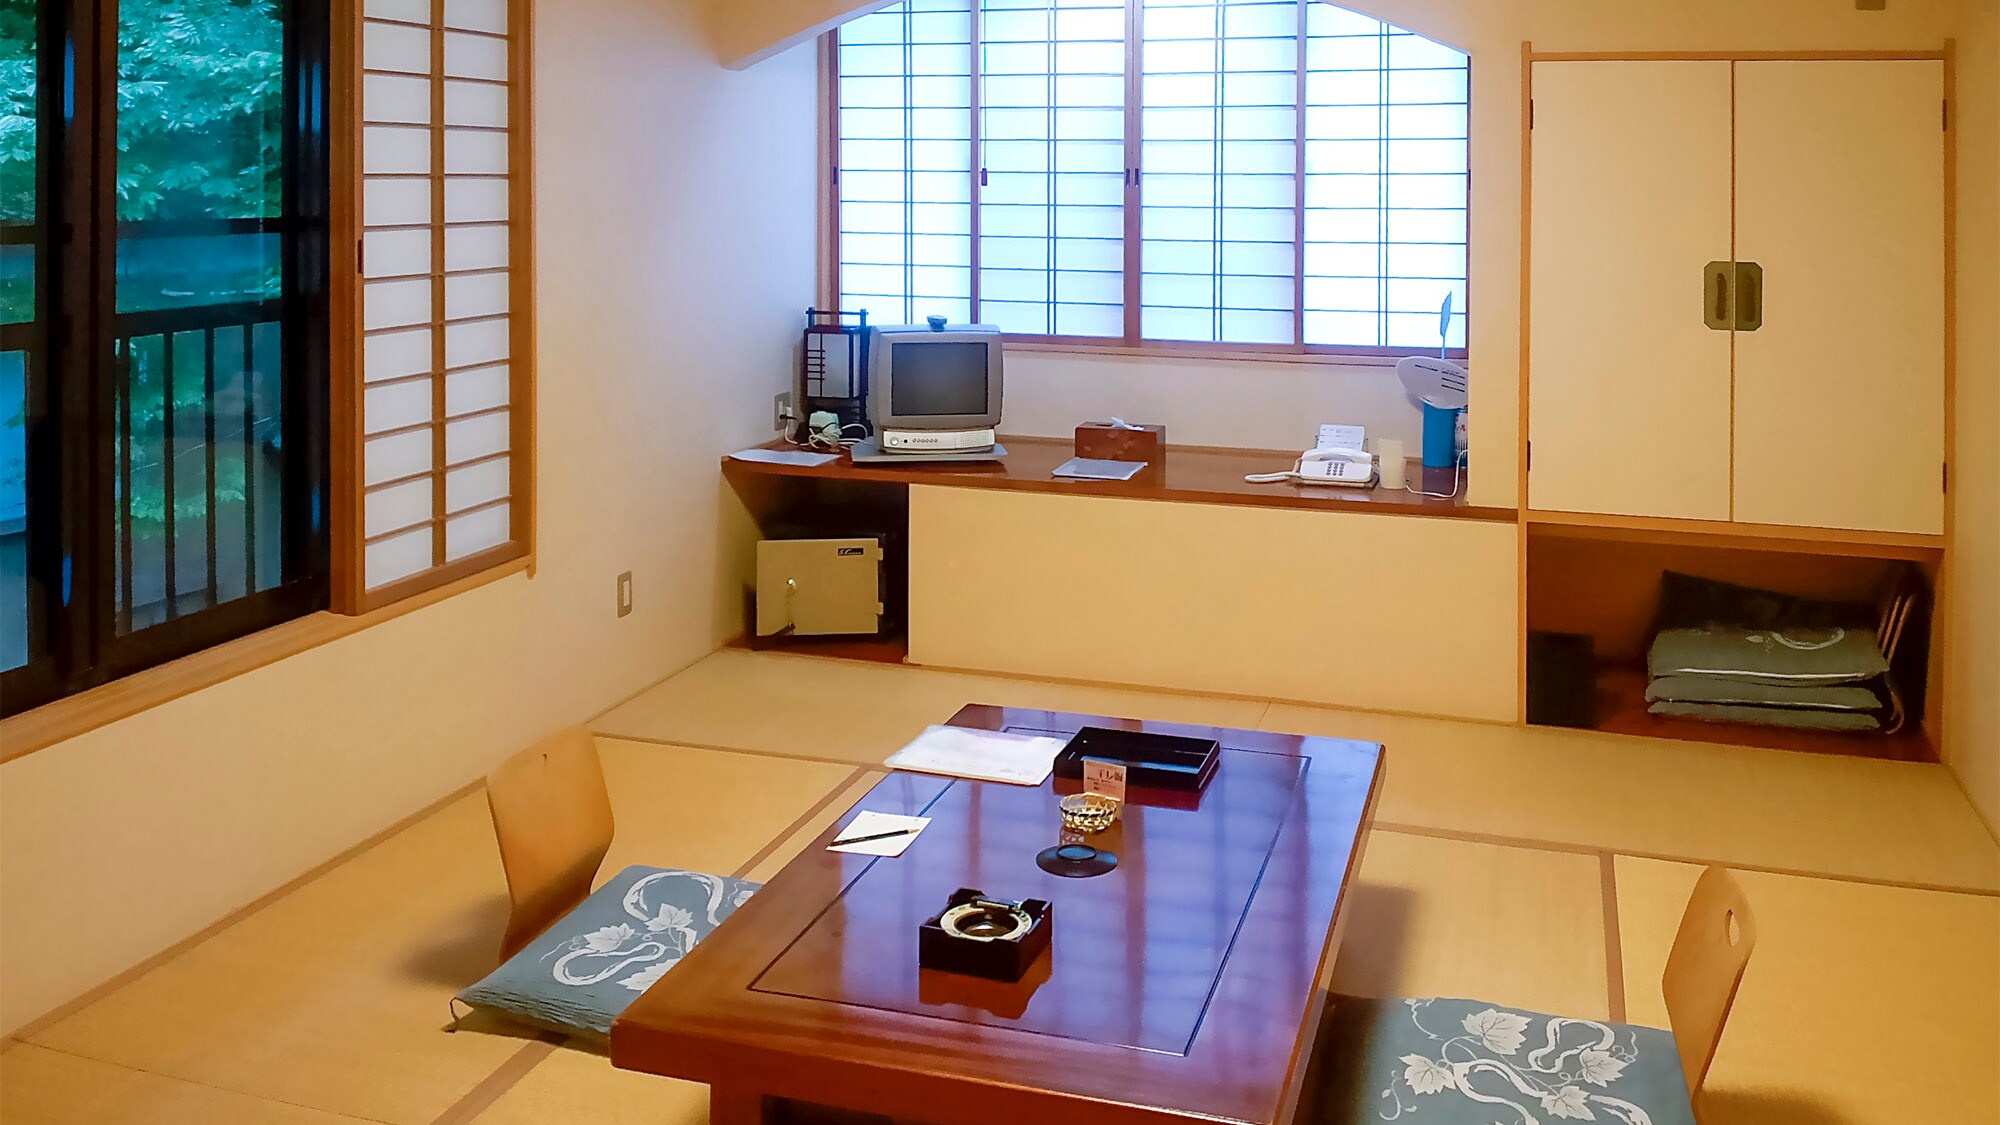 ・ Standard guest room in the main building: Convenient for moving to the large communal bath on the 1st floor